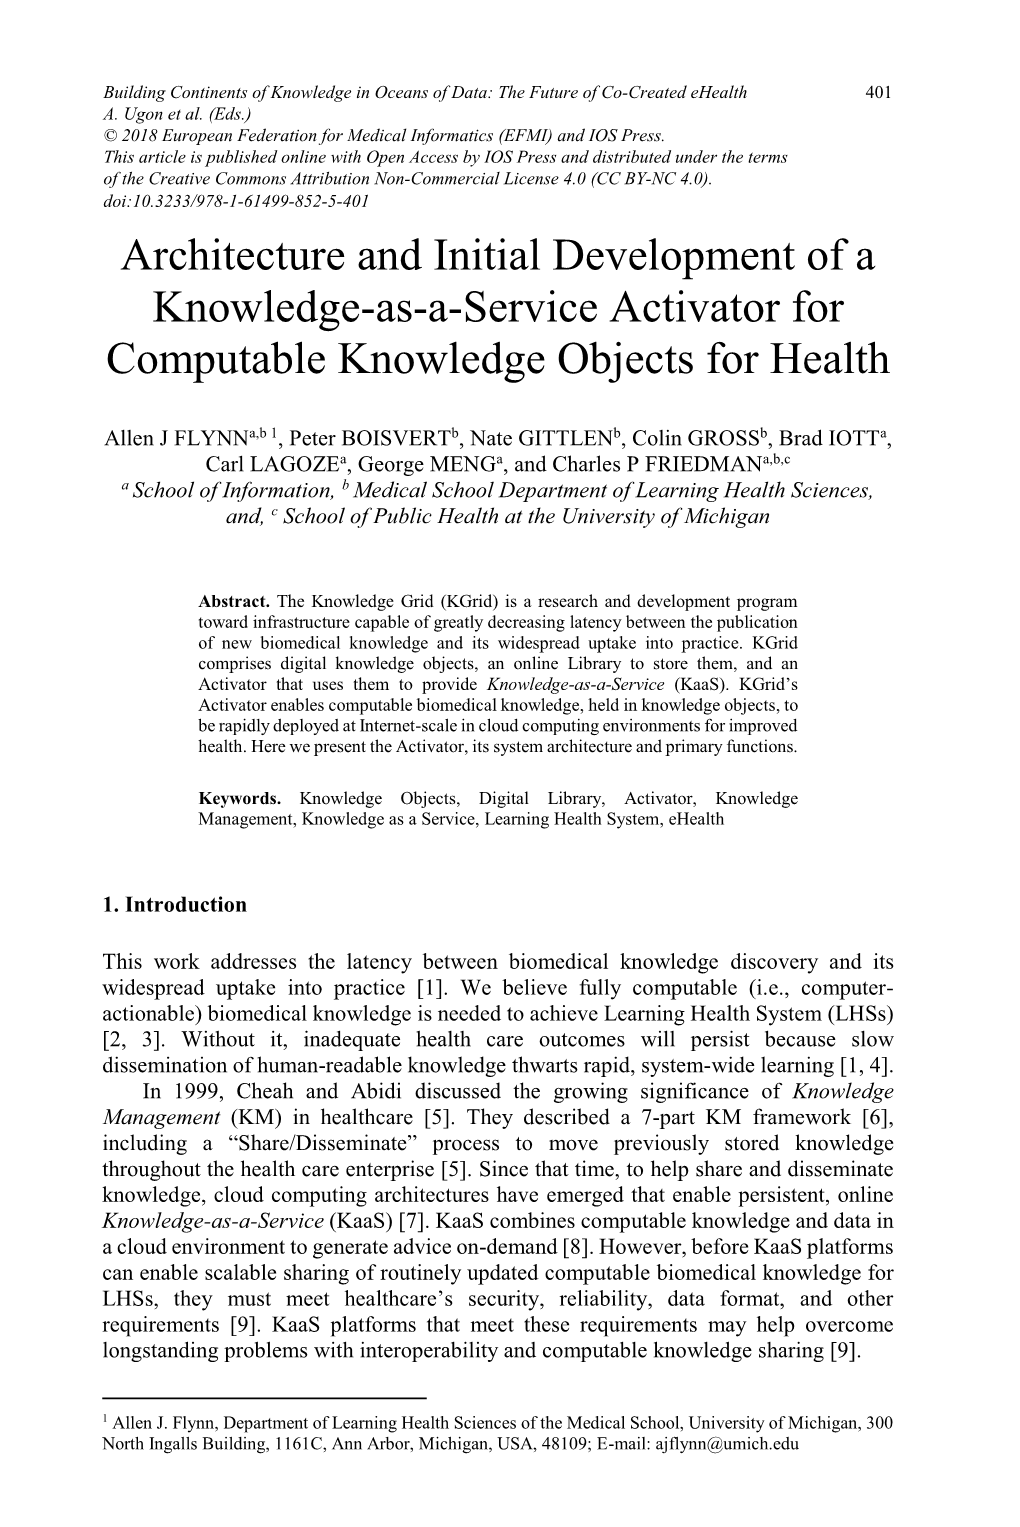 Architecture and Initial Development of a Knowledge-As-A-Service Activator for Computable Knowledge Objects for Health